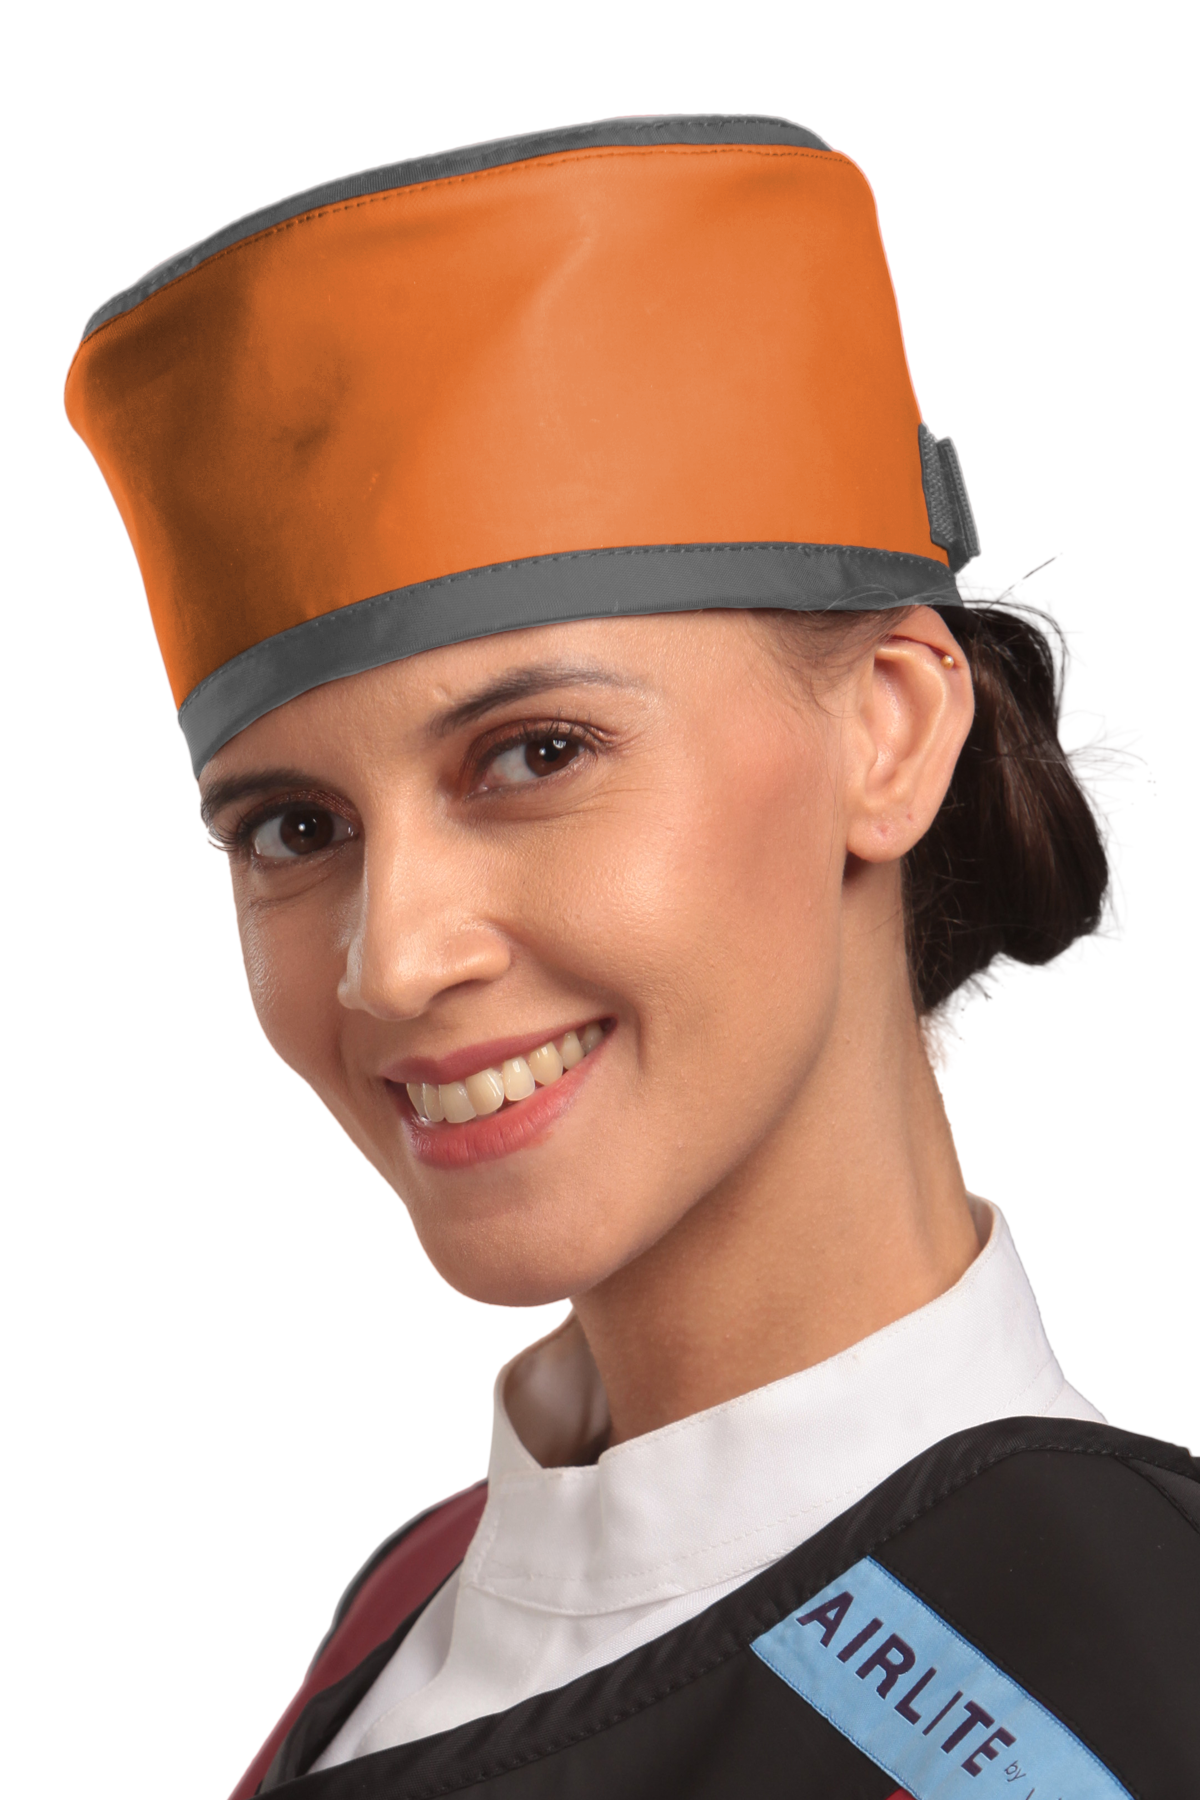 Up-close left-side frontal view of a female model wearing a radiation protection head shield. The head shield is Tangerine with grey-colored lines around the lower and upper edges.